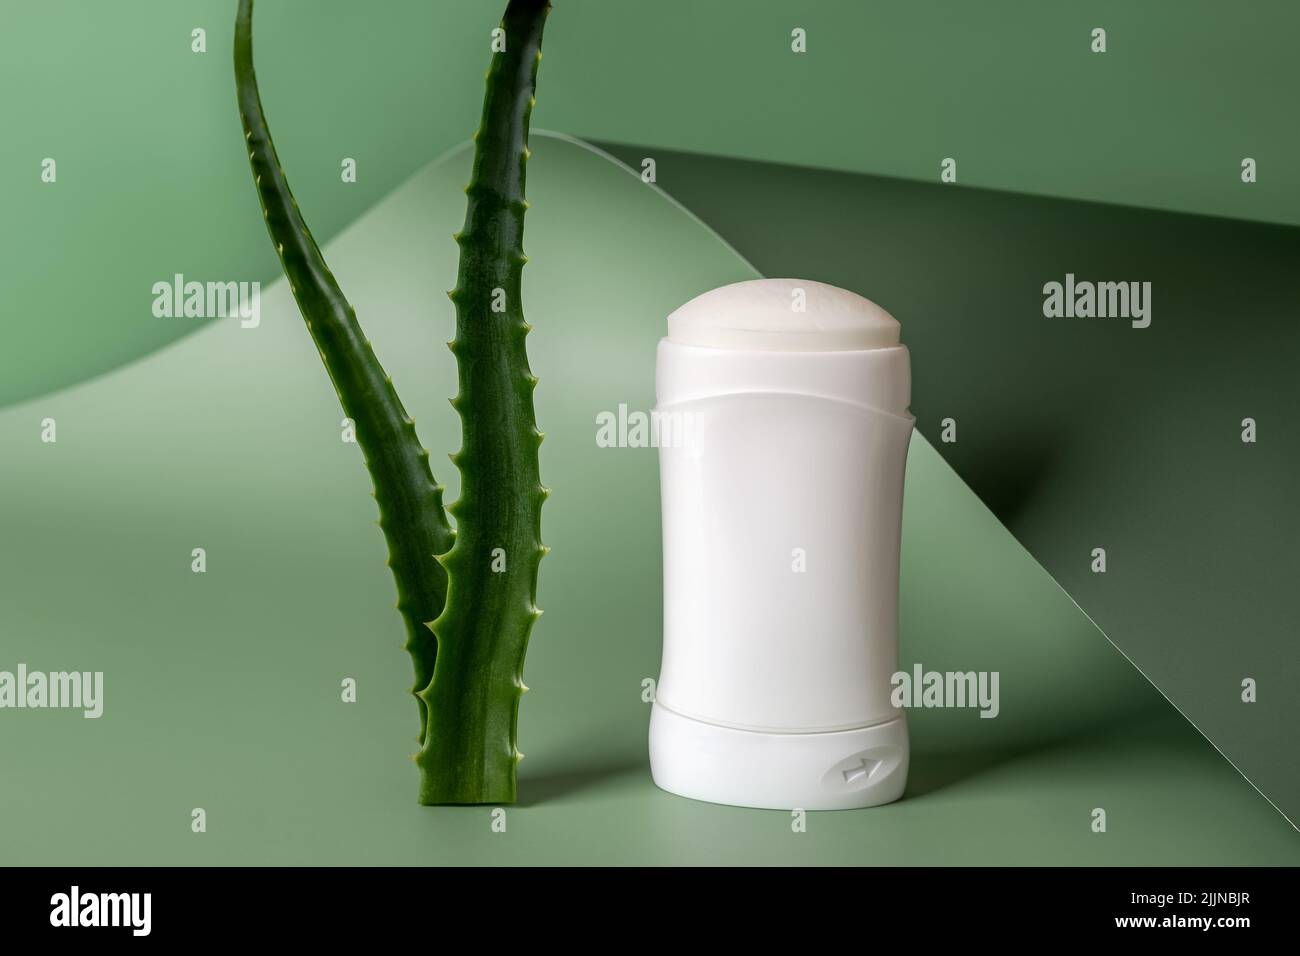 Solid antiperspirant deodorant near two fresh aloe leaves against green wavy background. Concept of natural herbal cosmetics and organic toiletries. Stock Photo